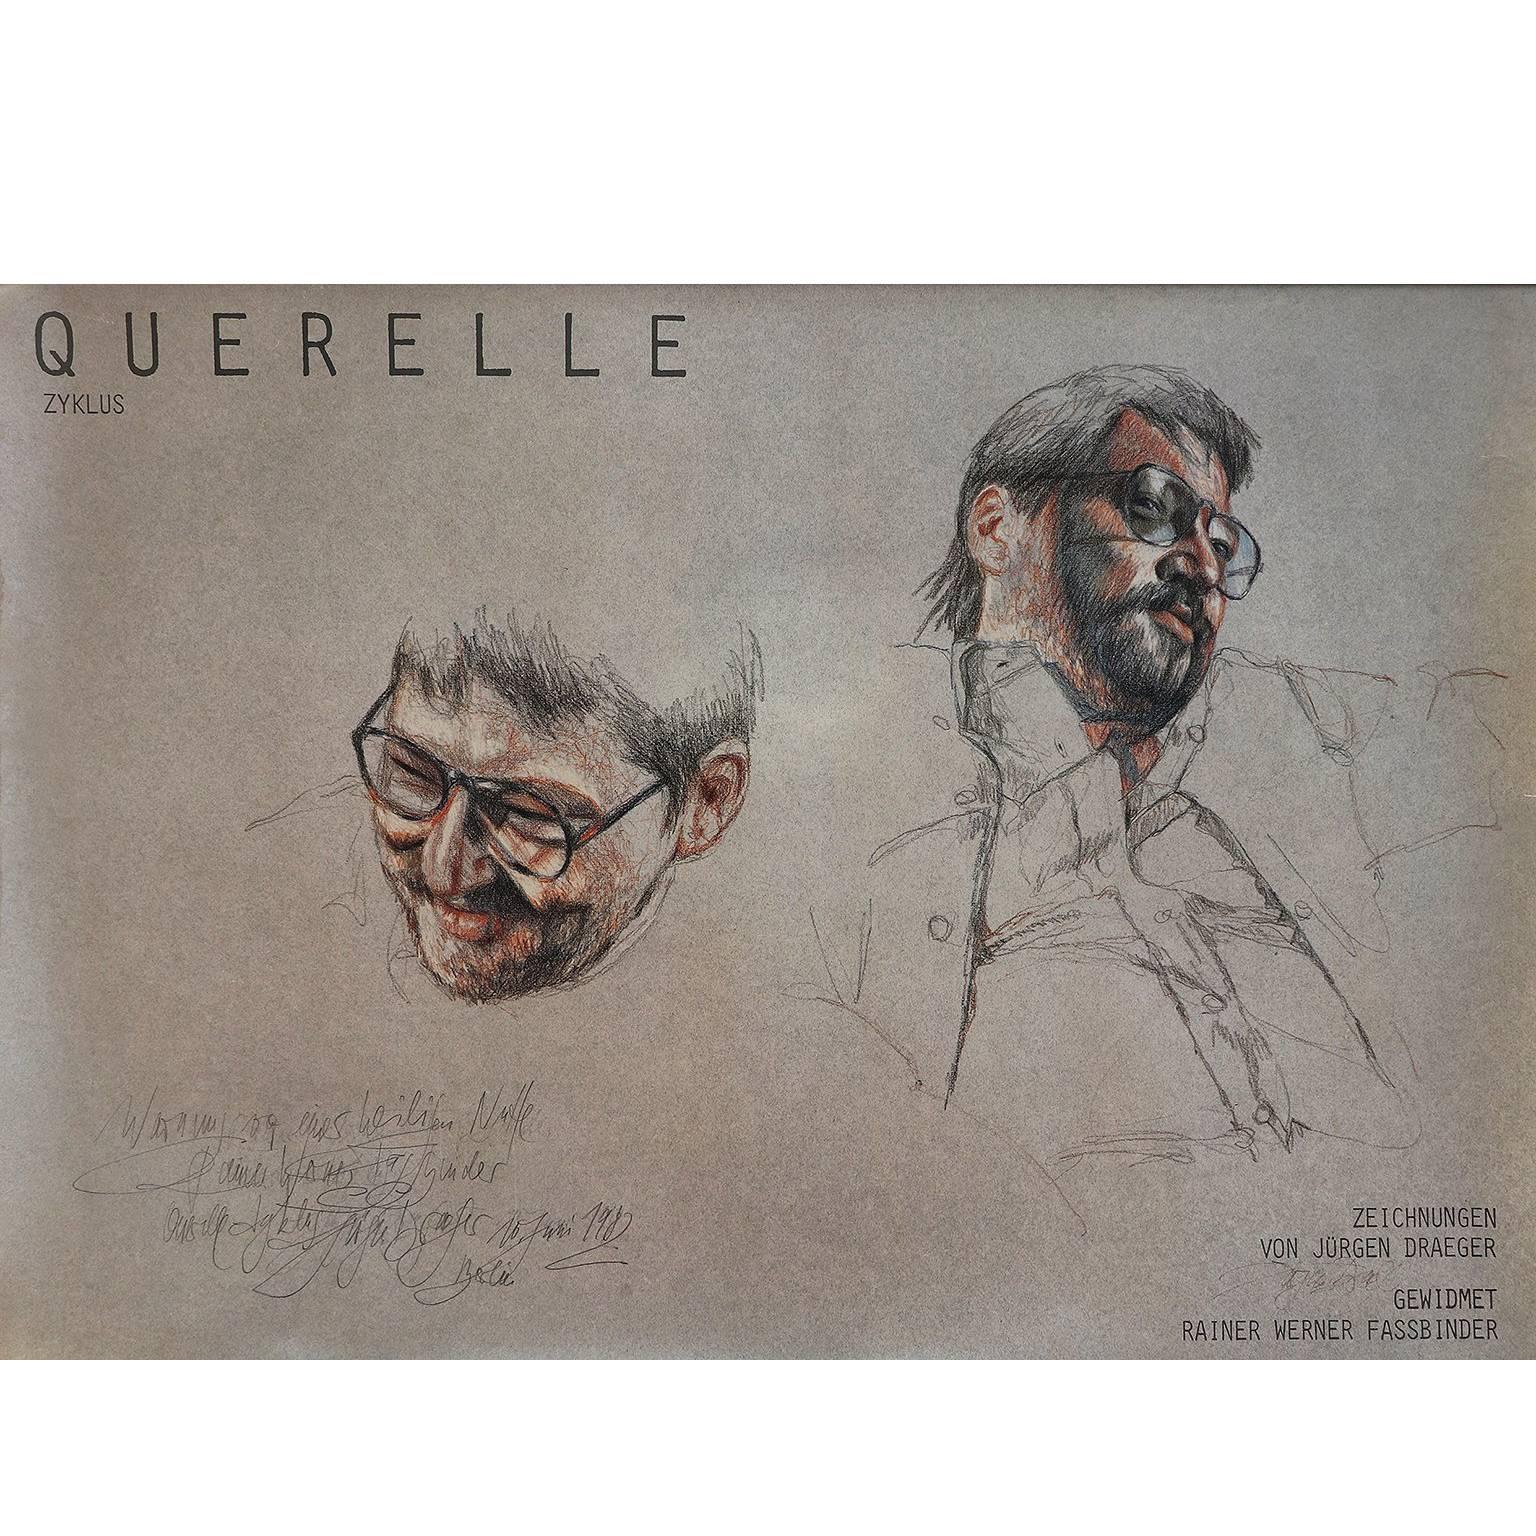 Original Poster Art Print for R.W. Fassbinders "Querelle", Germany, 1982